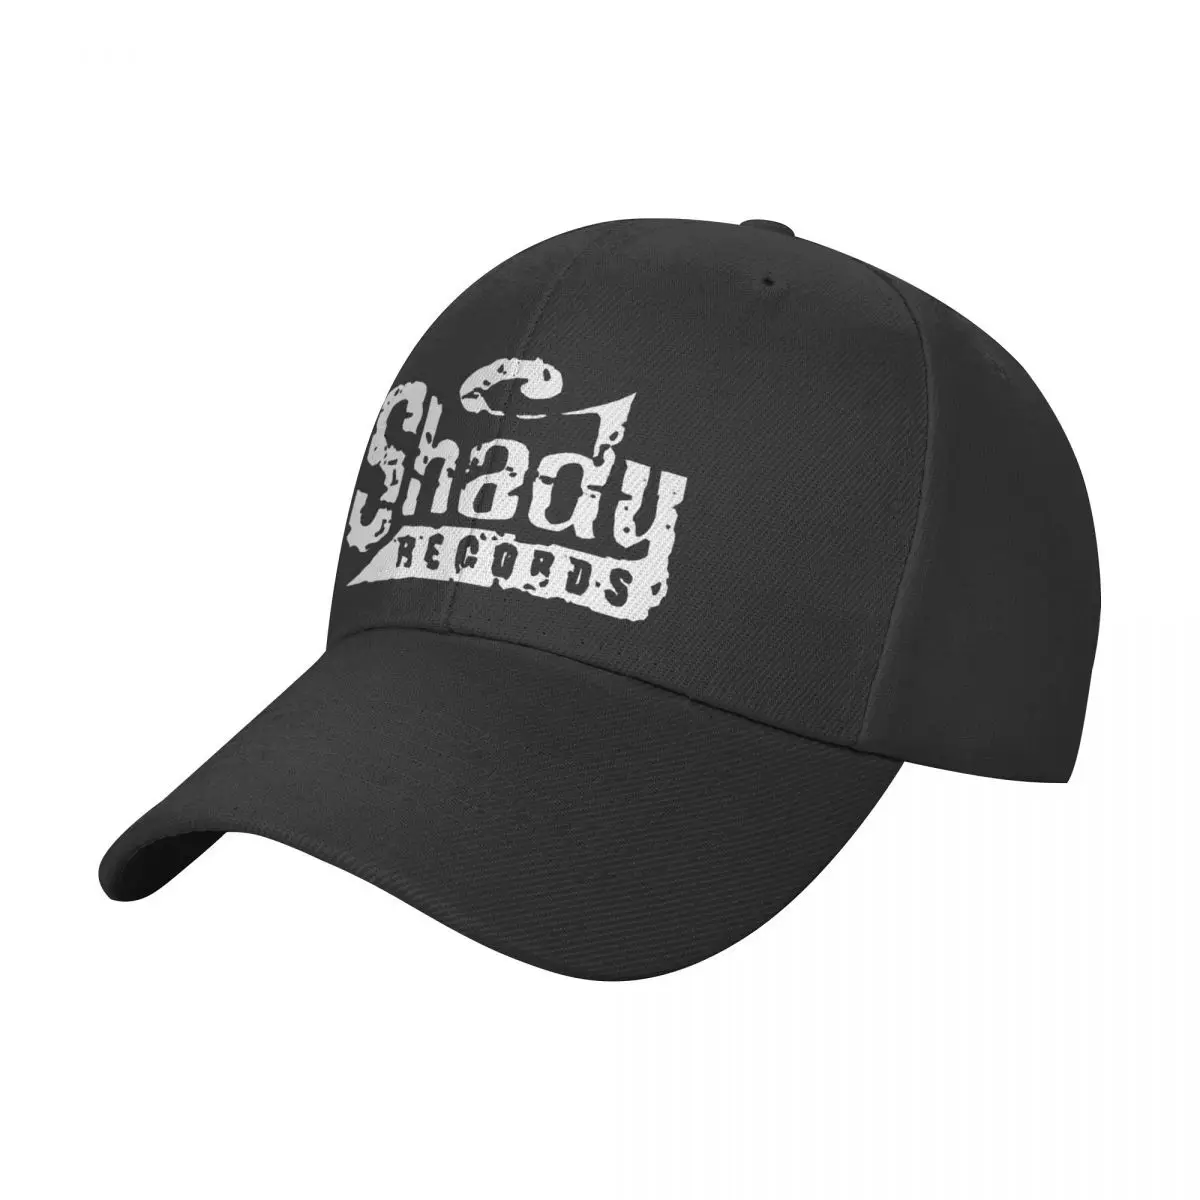 

Shady Records Solid Color Baseball Cap Snapback Caps Casquette Hats For Men Women